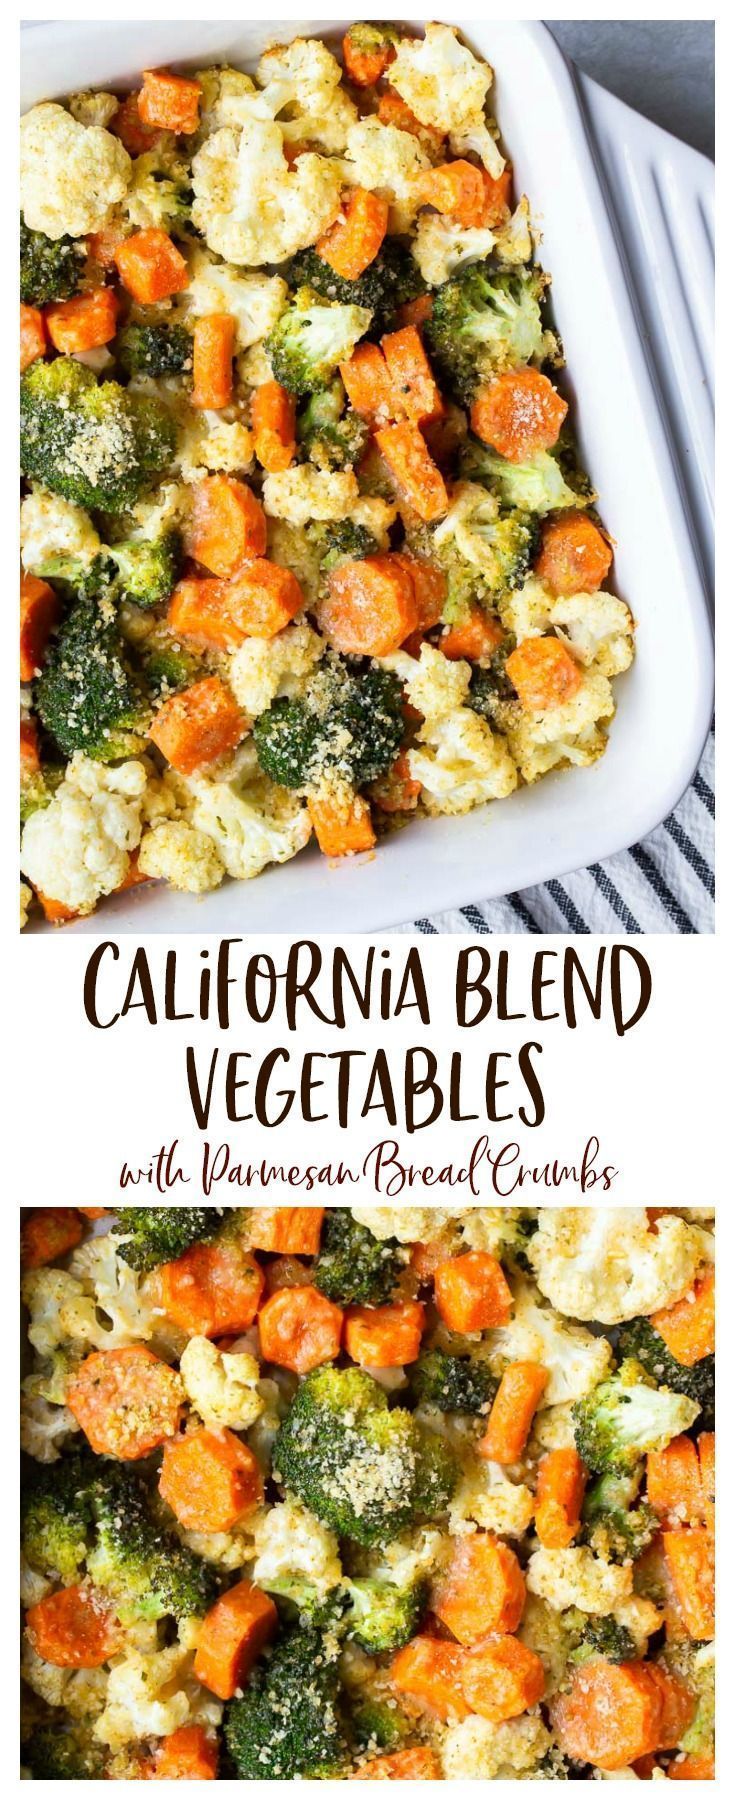 California Blend Vegetables with Parmesan Bread Crumbs - California Blend Vegetables with Parmesan Bread Crumbs -   19 thanksgiving recipes side dishes healthy ideas